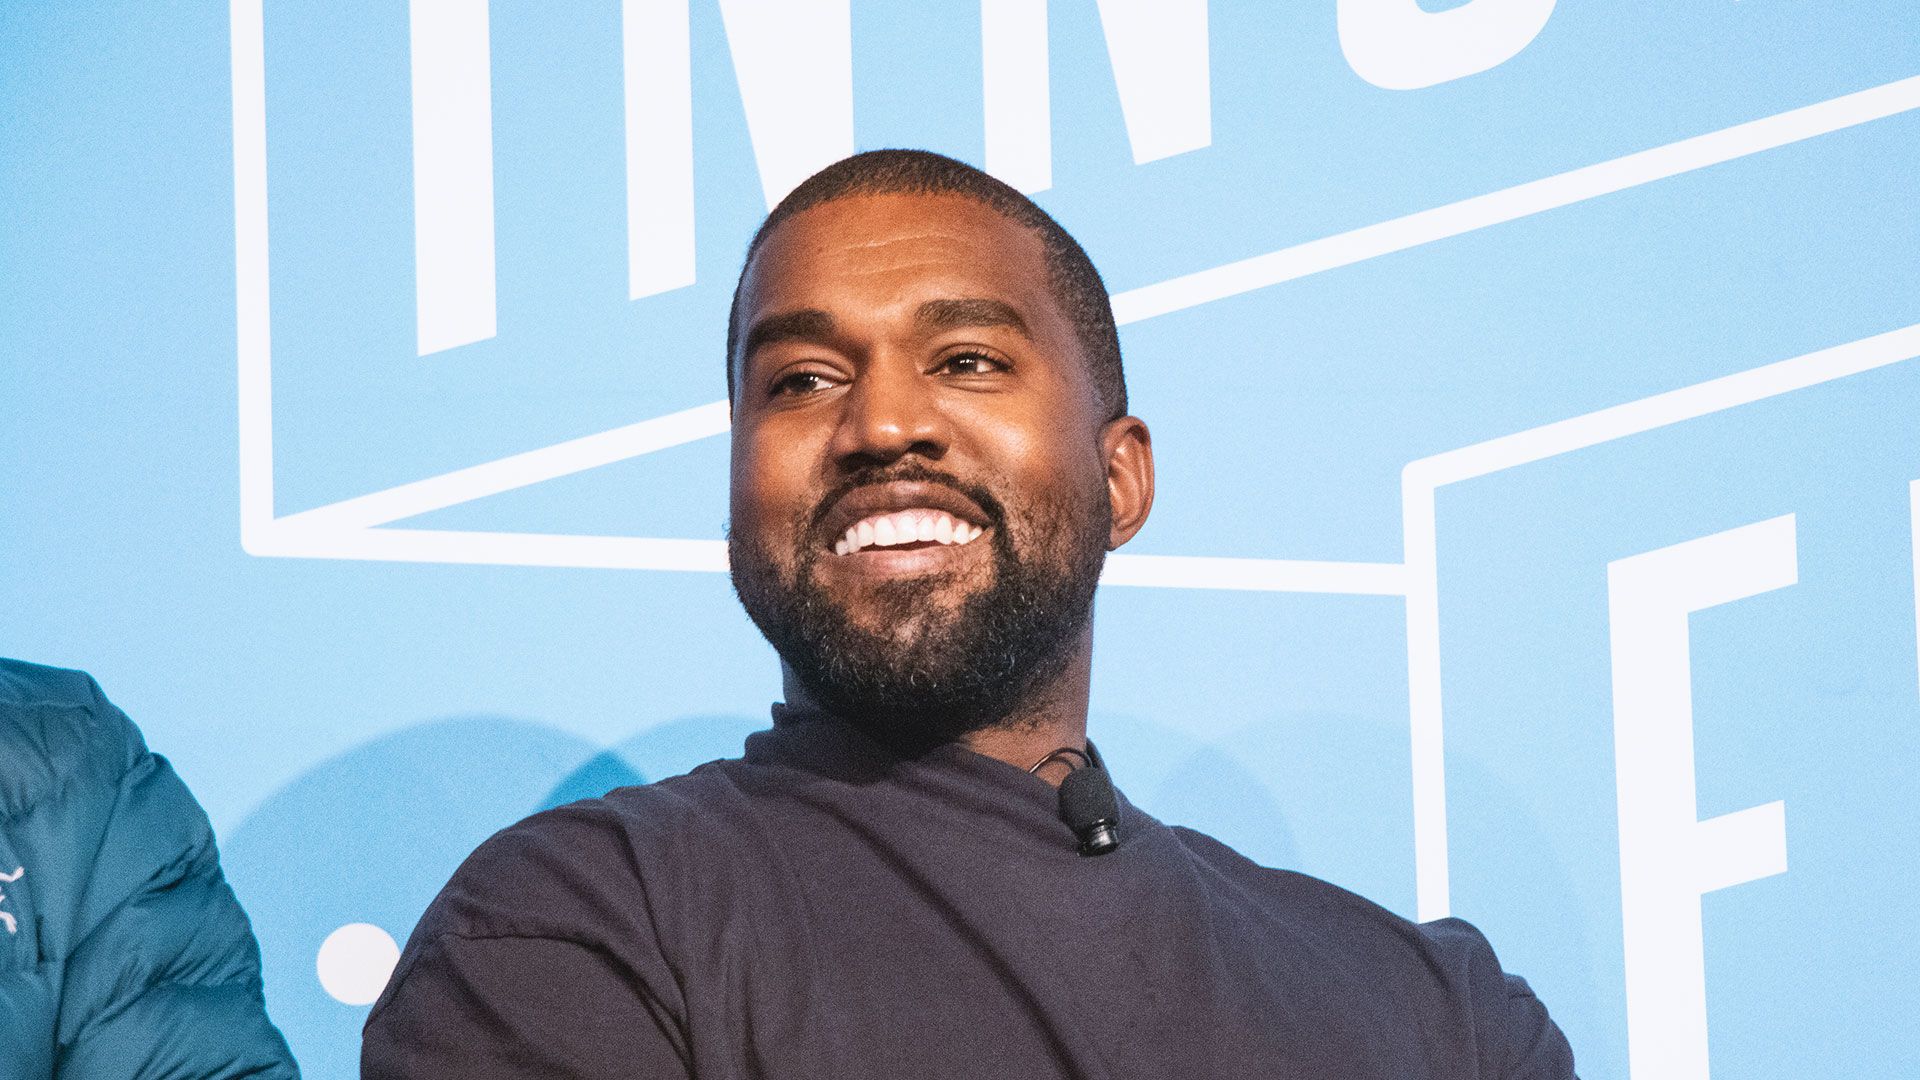 Kanye West Wanted to Work With Nintendo on a Video Game